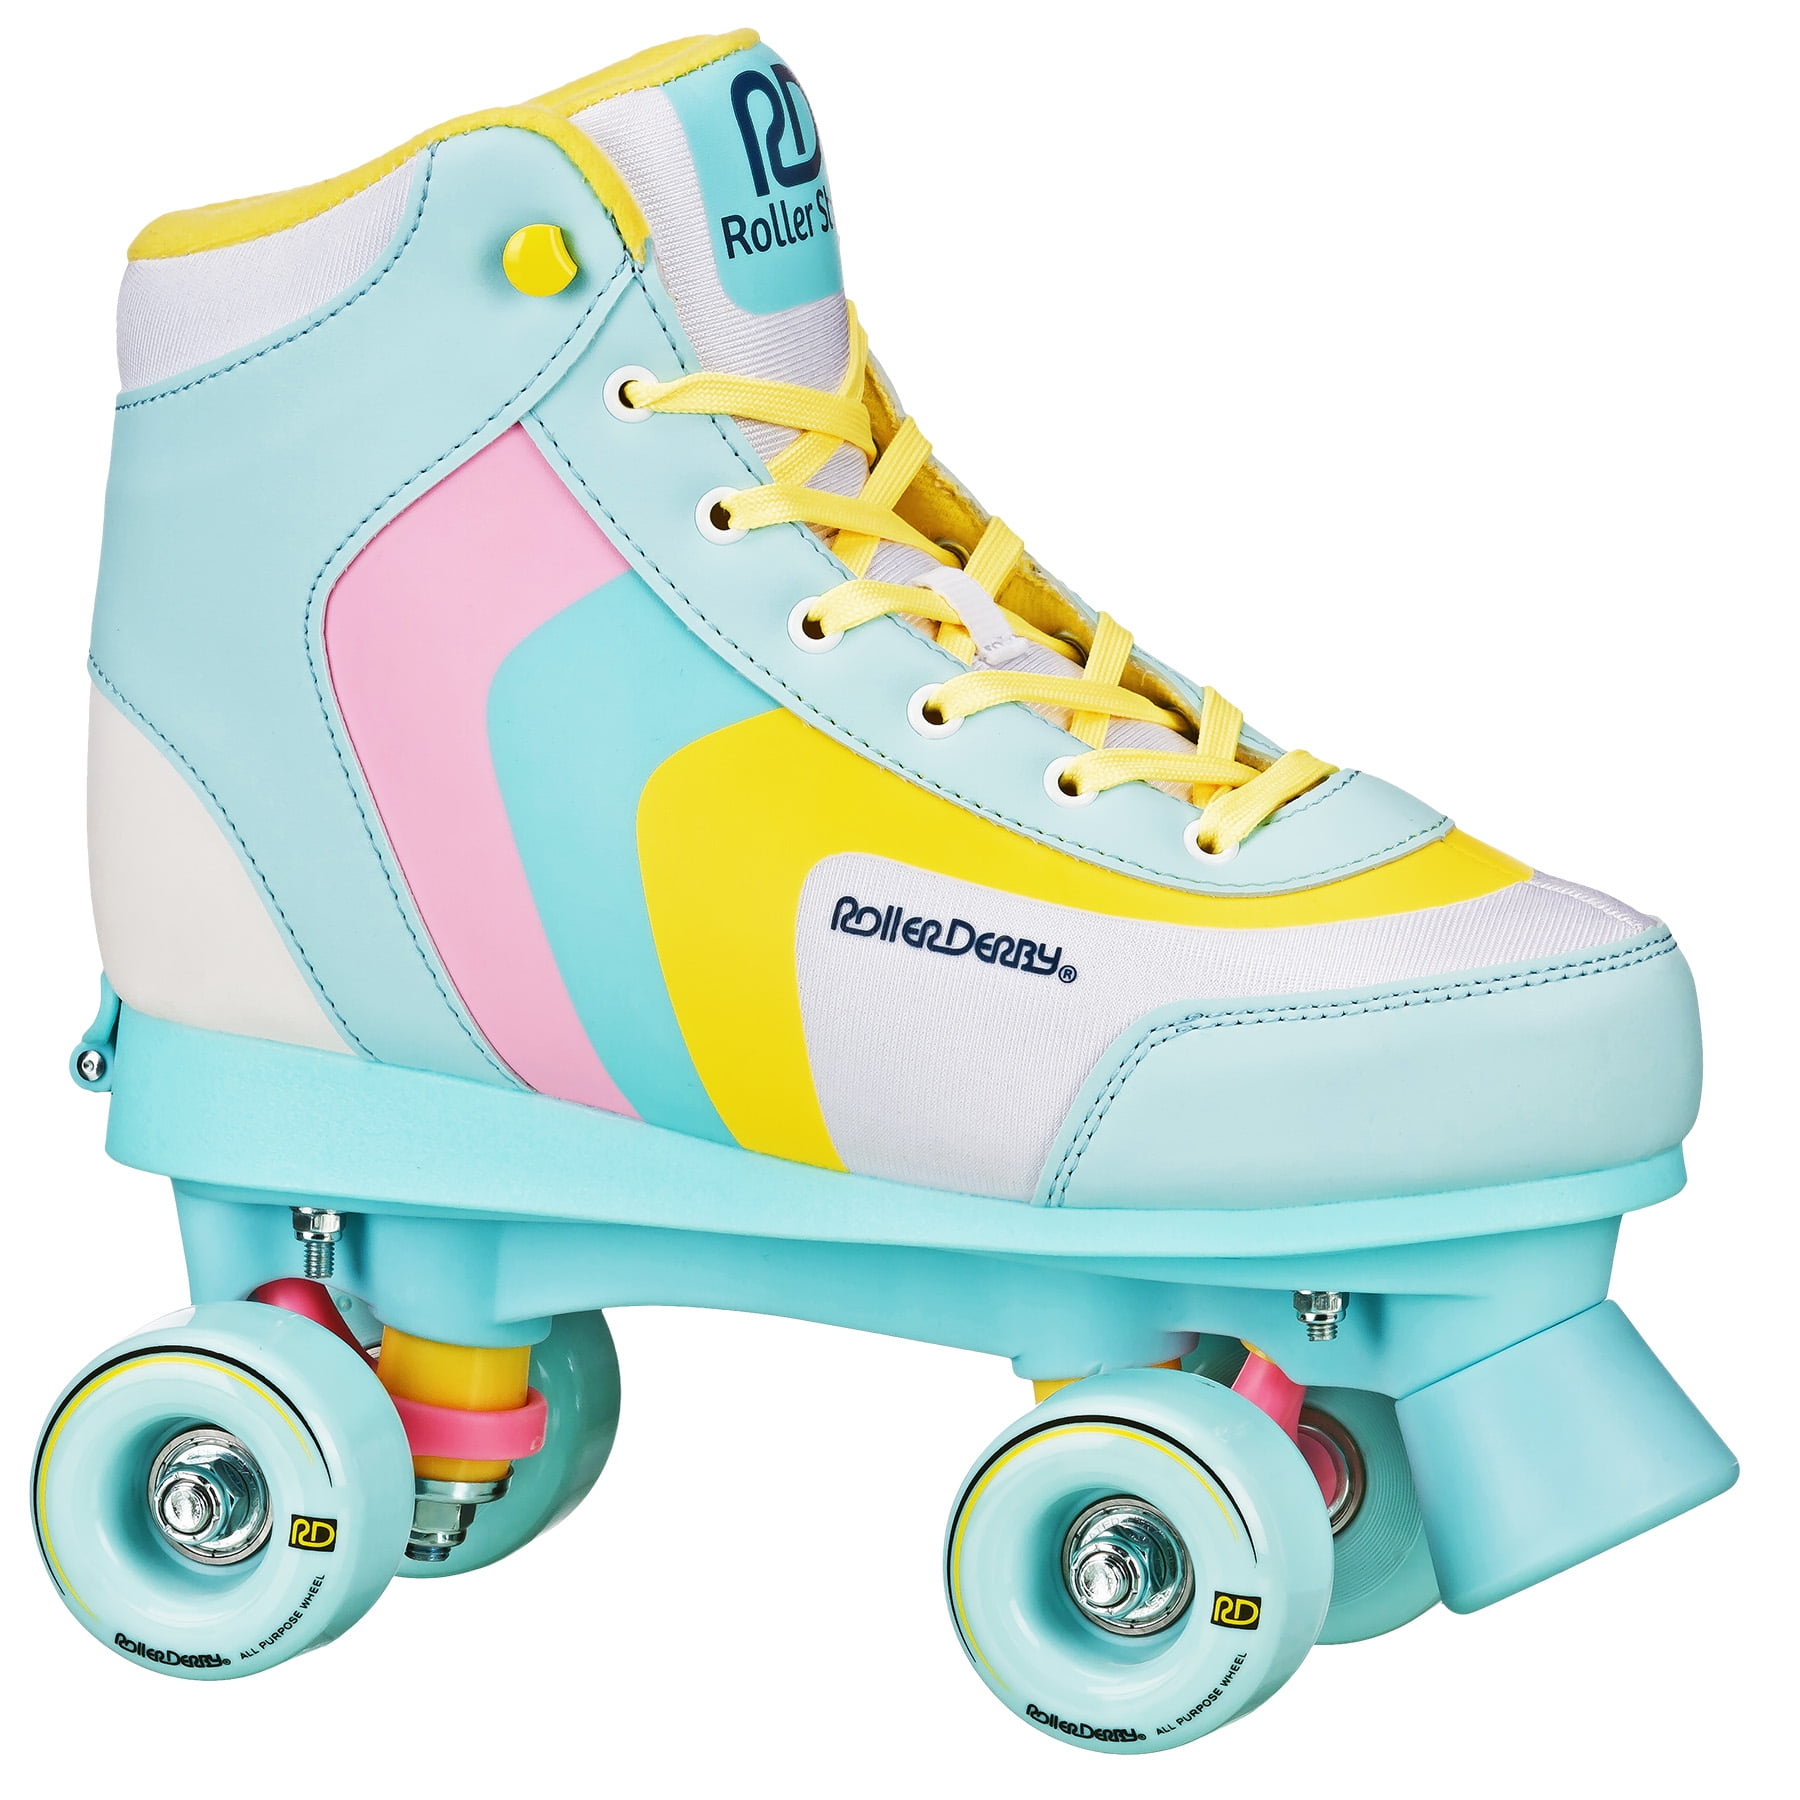 Roller Derby Quad Star Adjustable Youth Skates for Women and Girls, Size 3-6